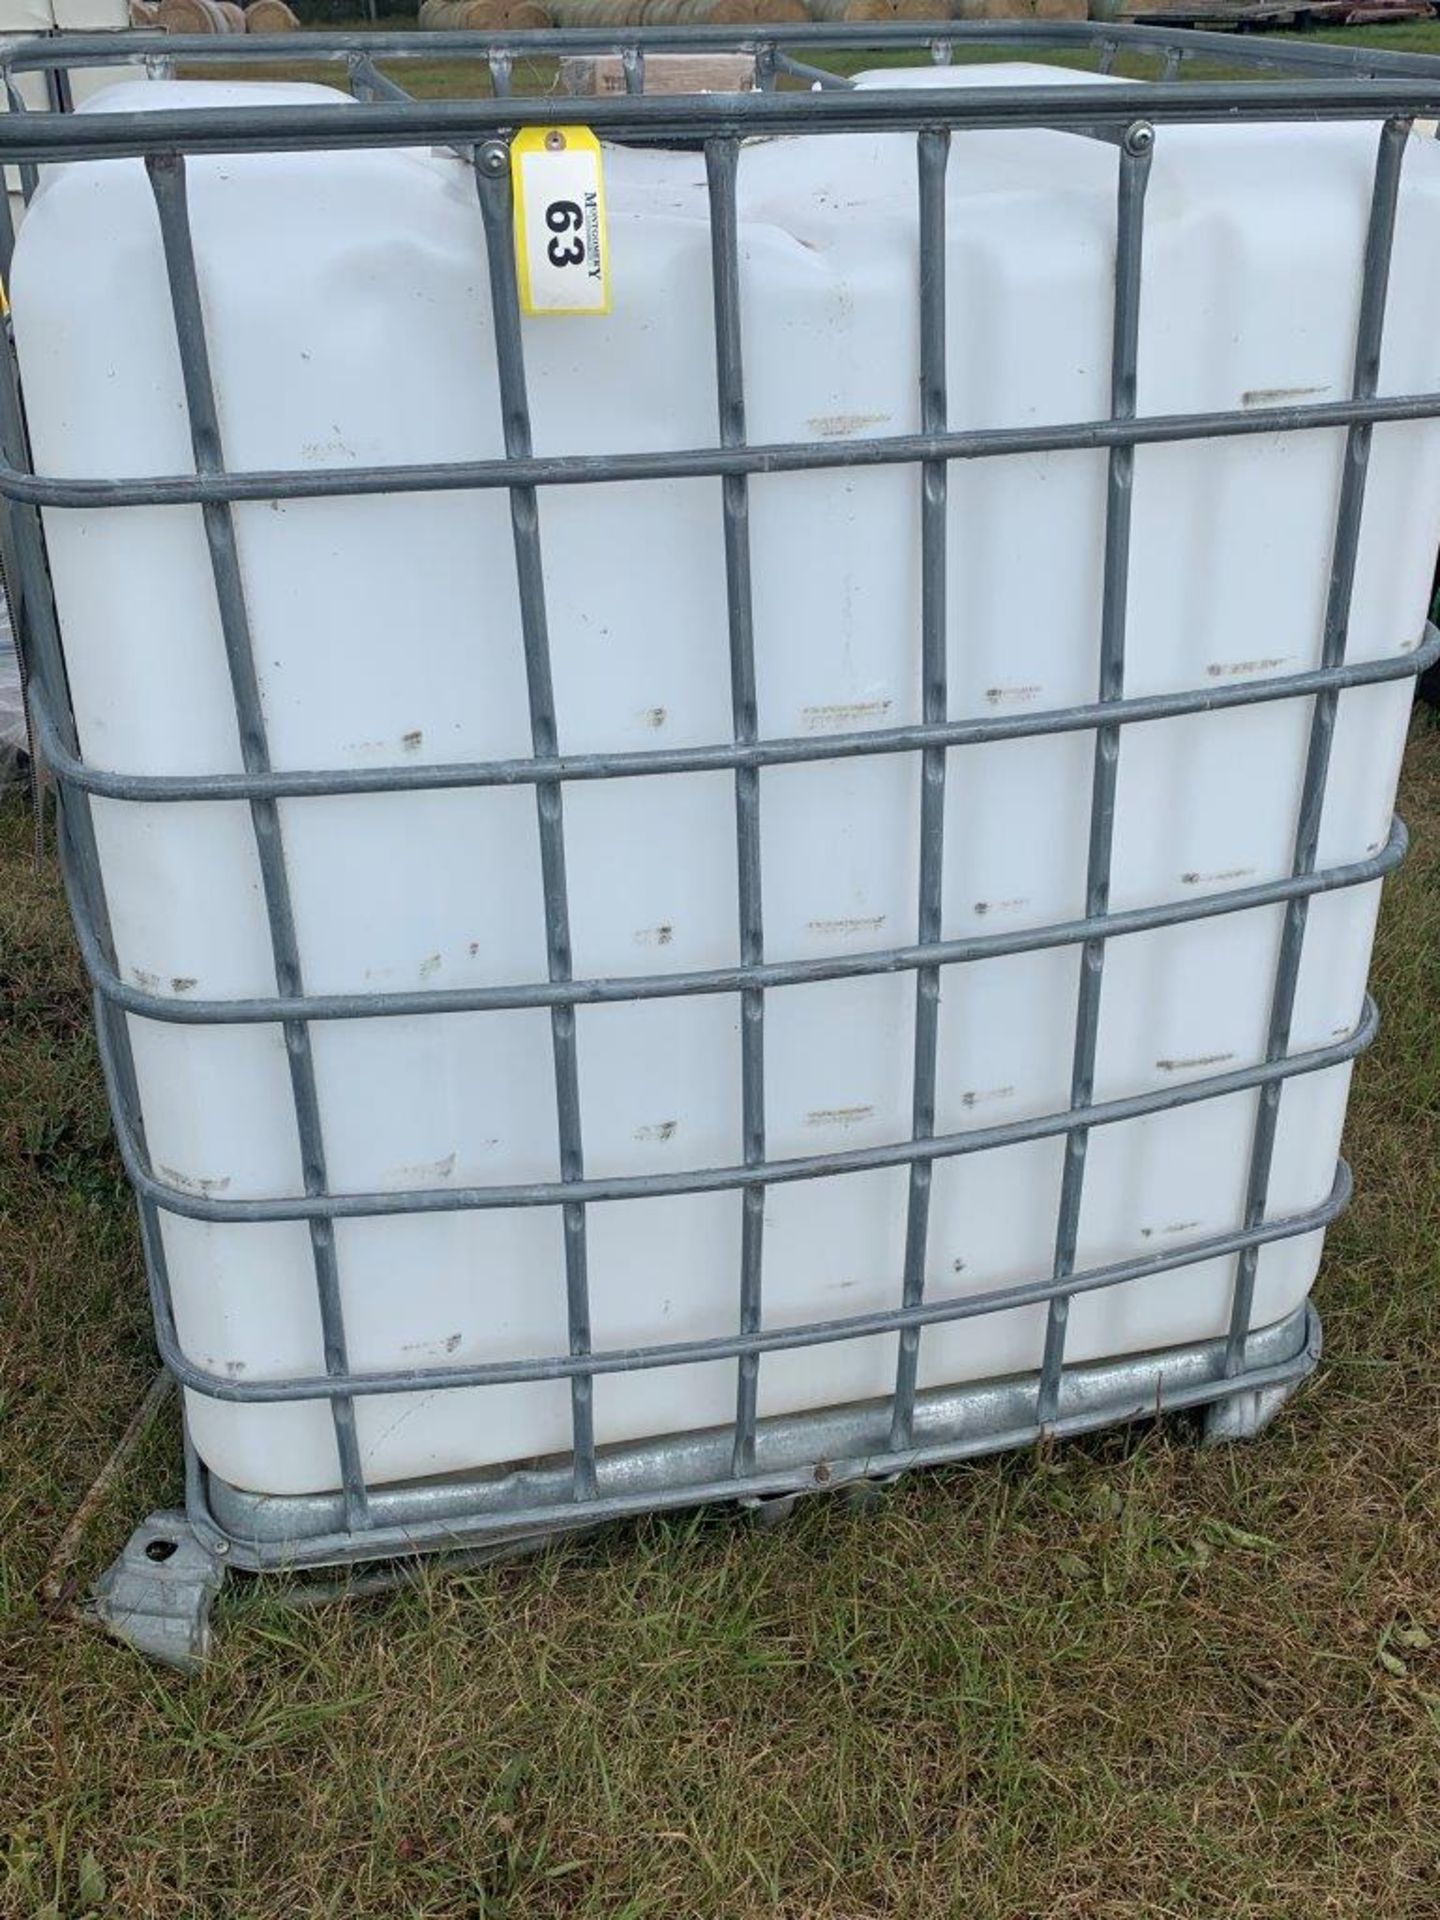 1200L POLY TOTE W/ CAGE - Image 3 of 4